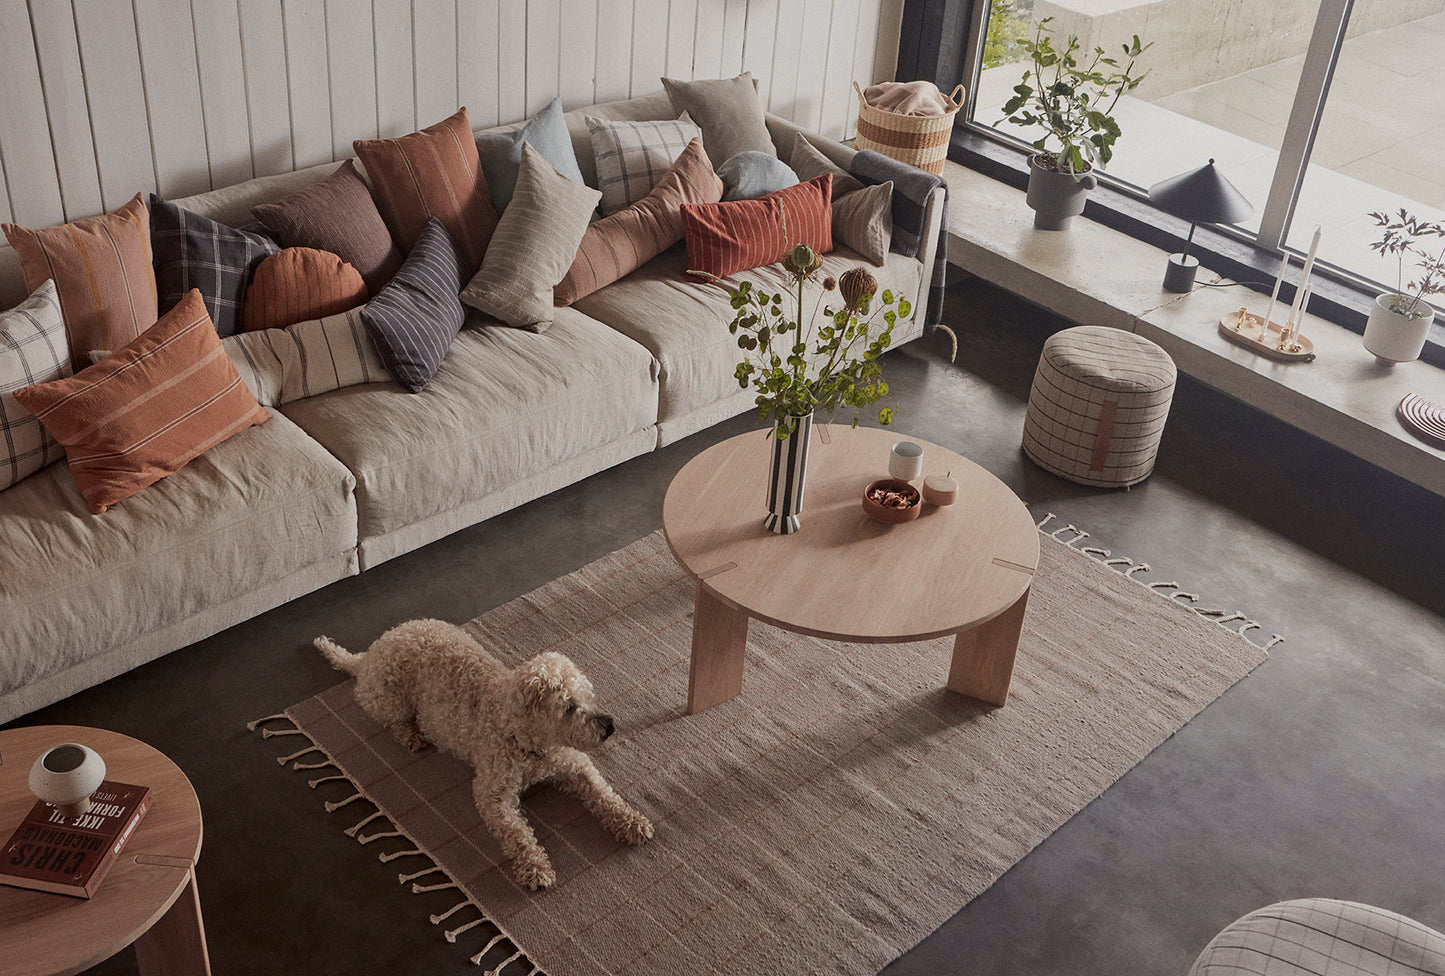 OYOY LIVING OY Coffee Table - Small Coffee Table 901 Nature